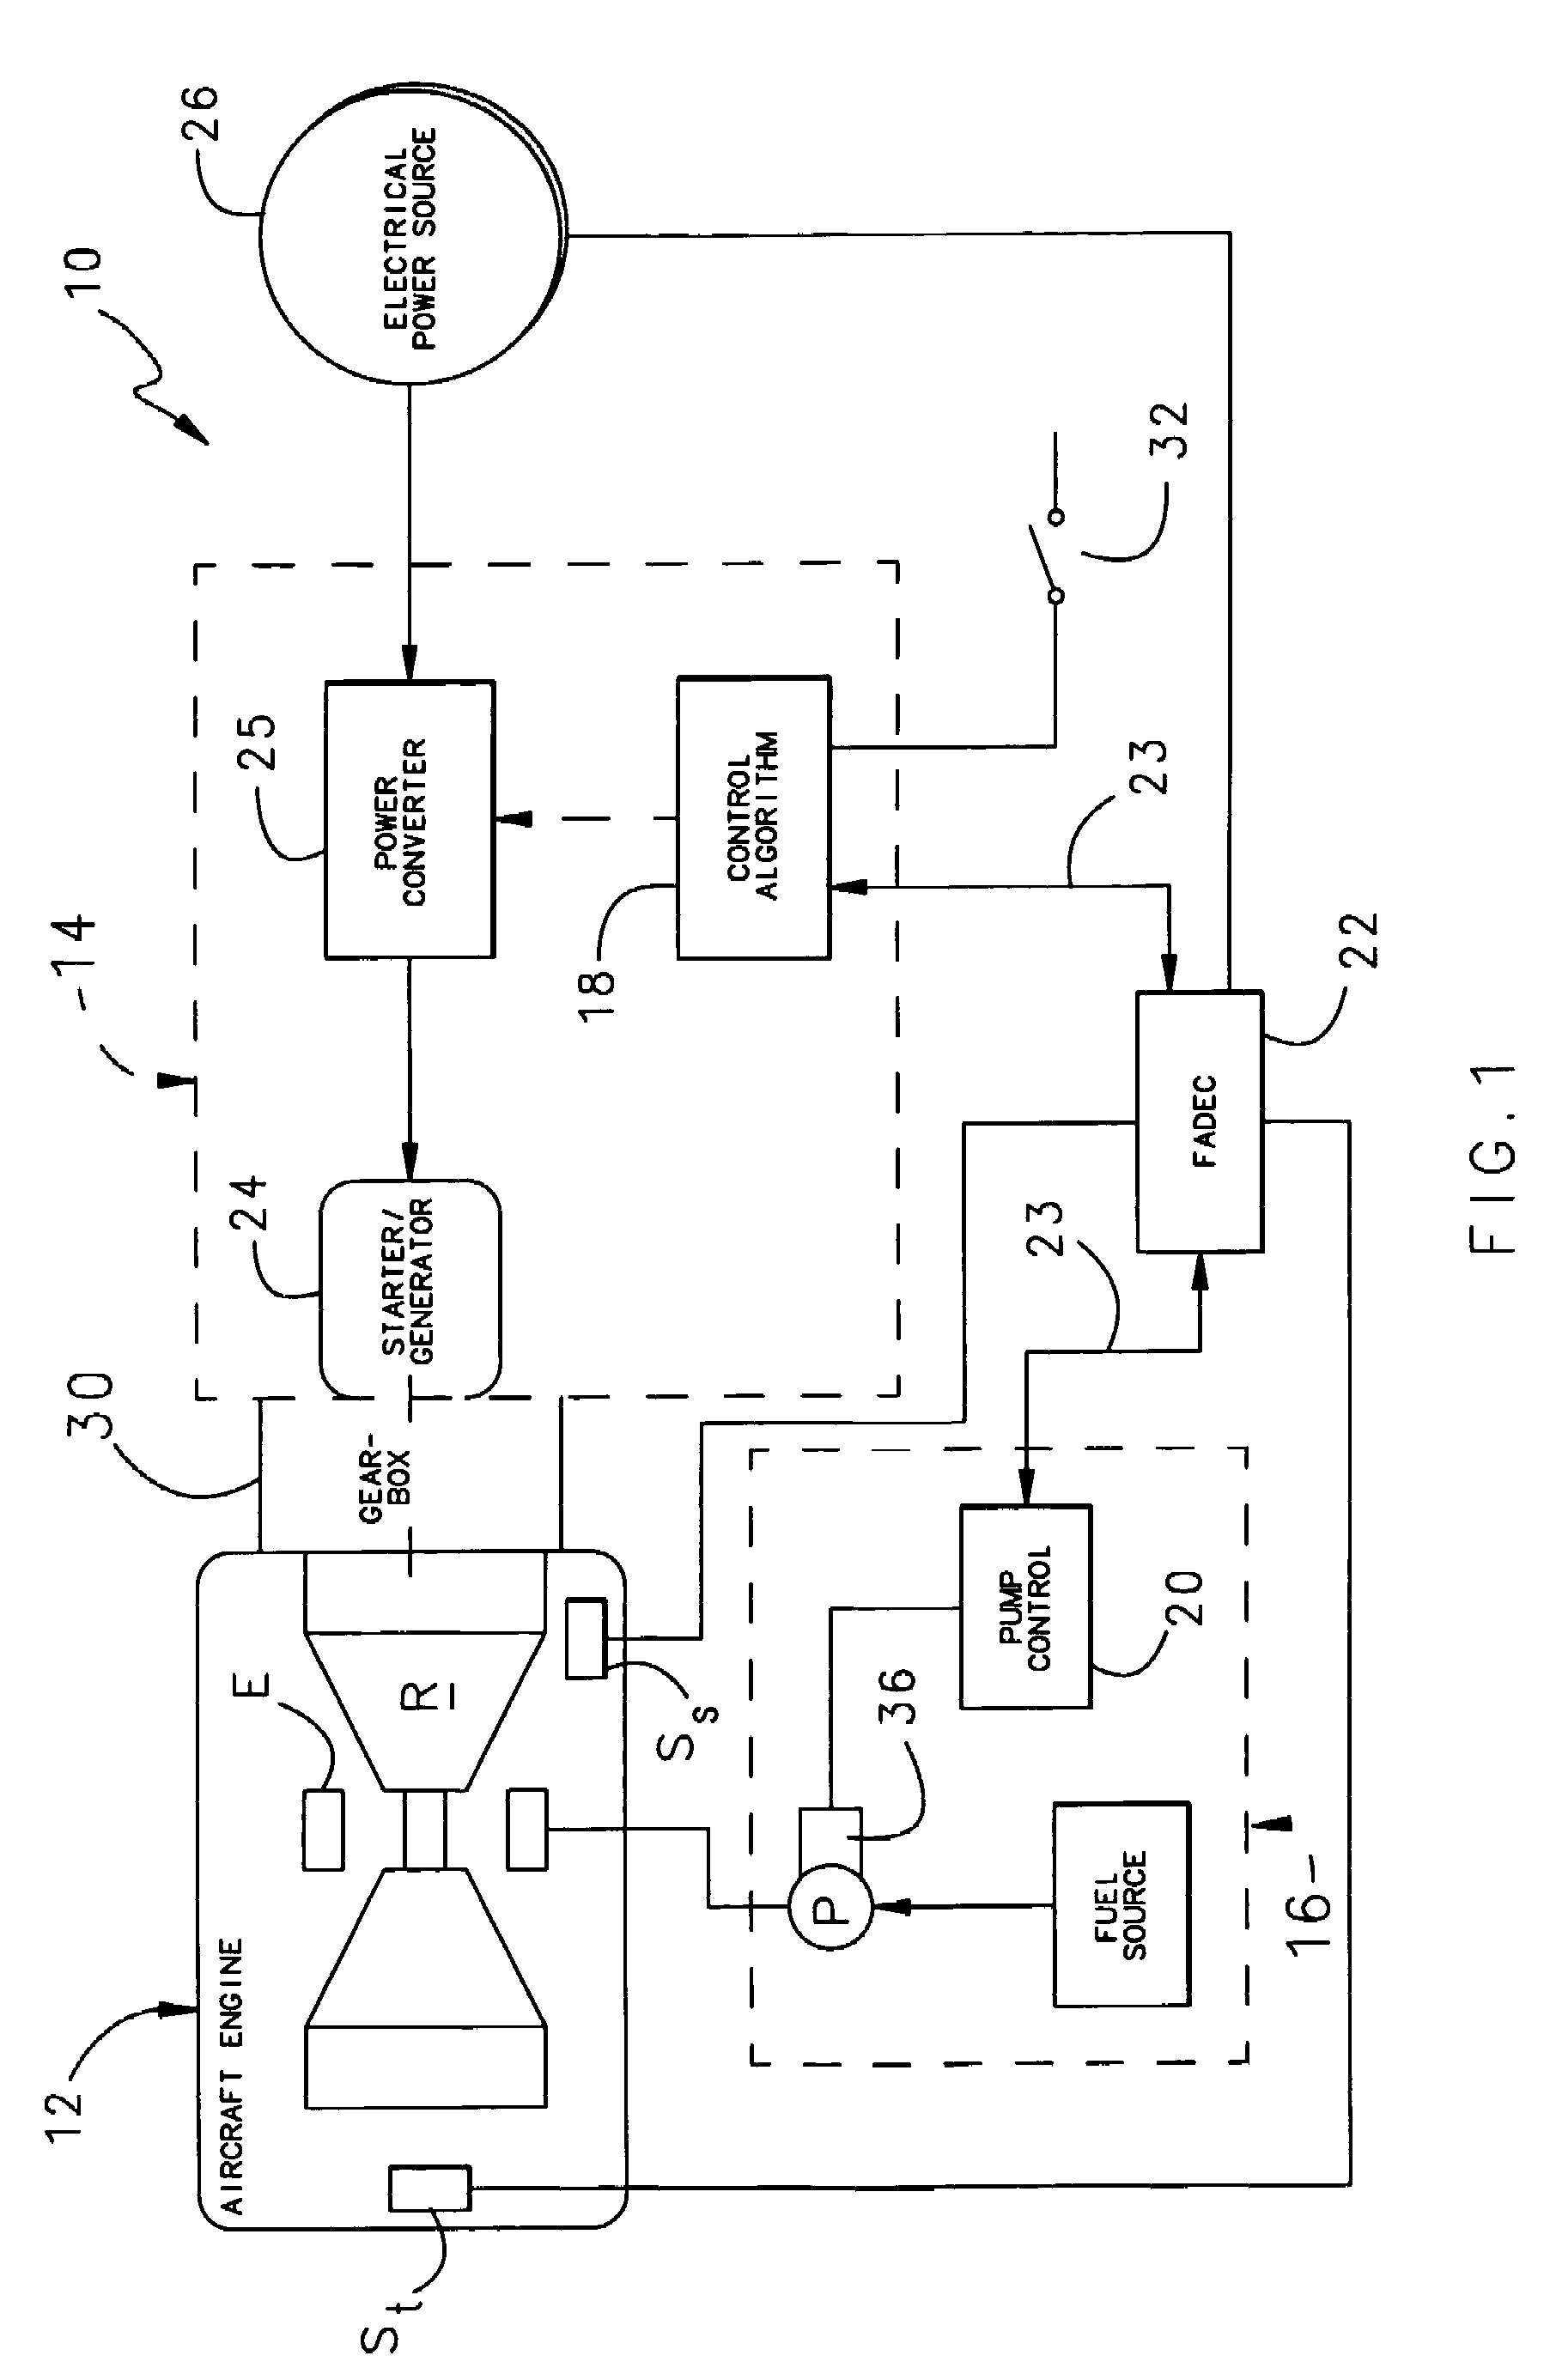 Electrical starter generator system for a gas turbine engine